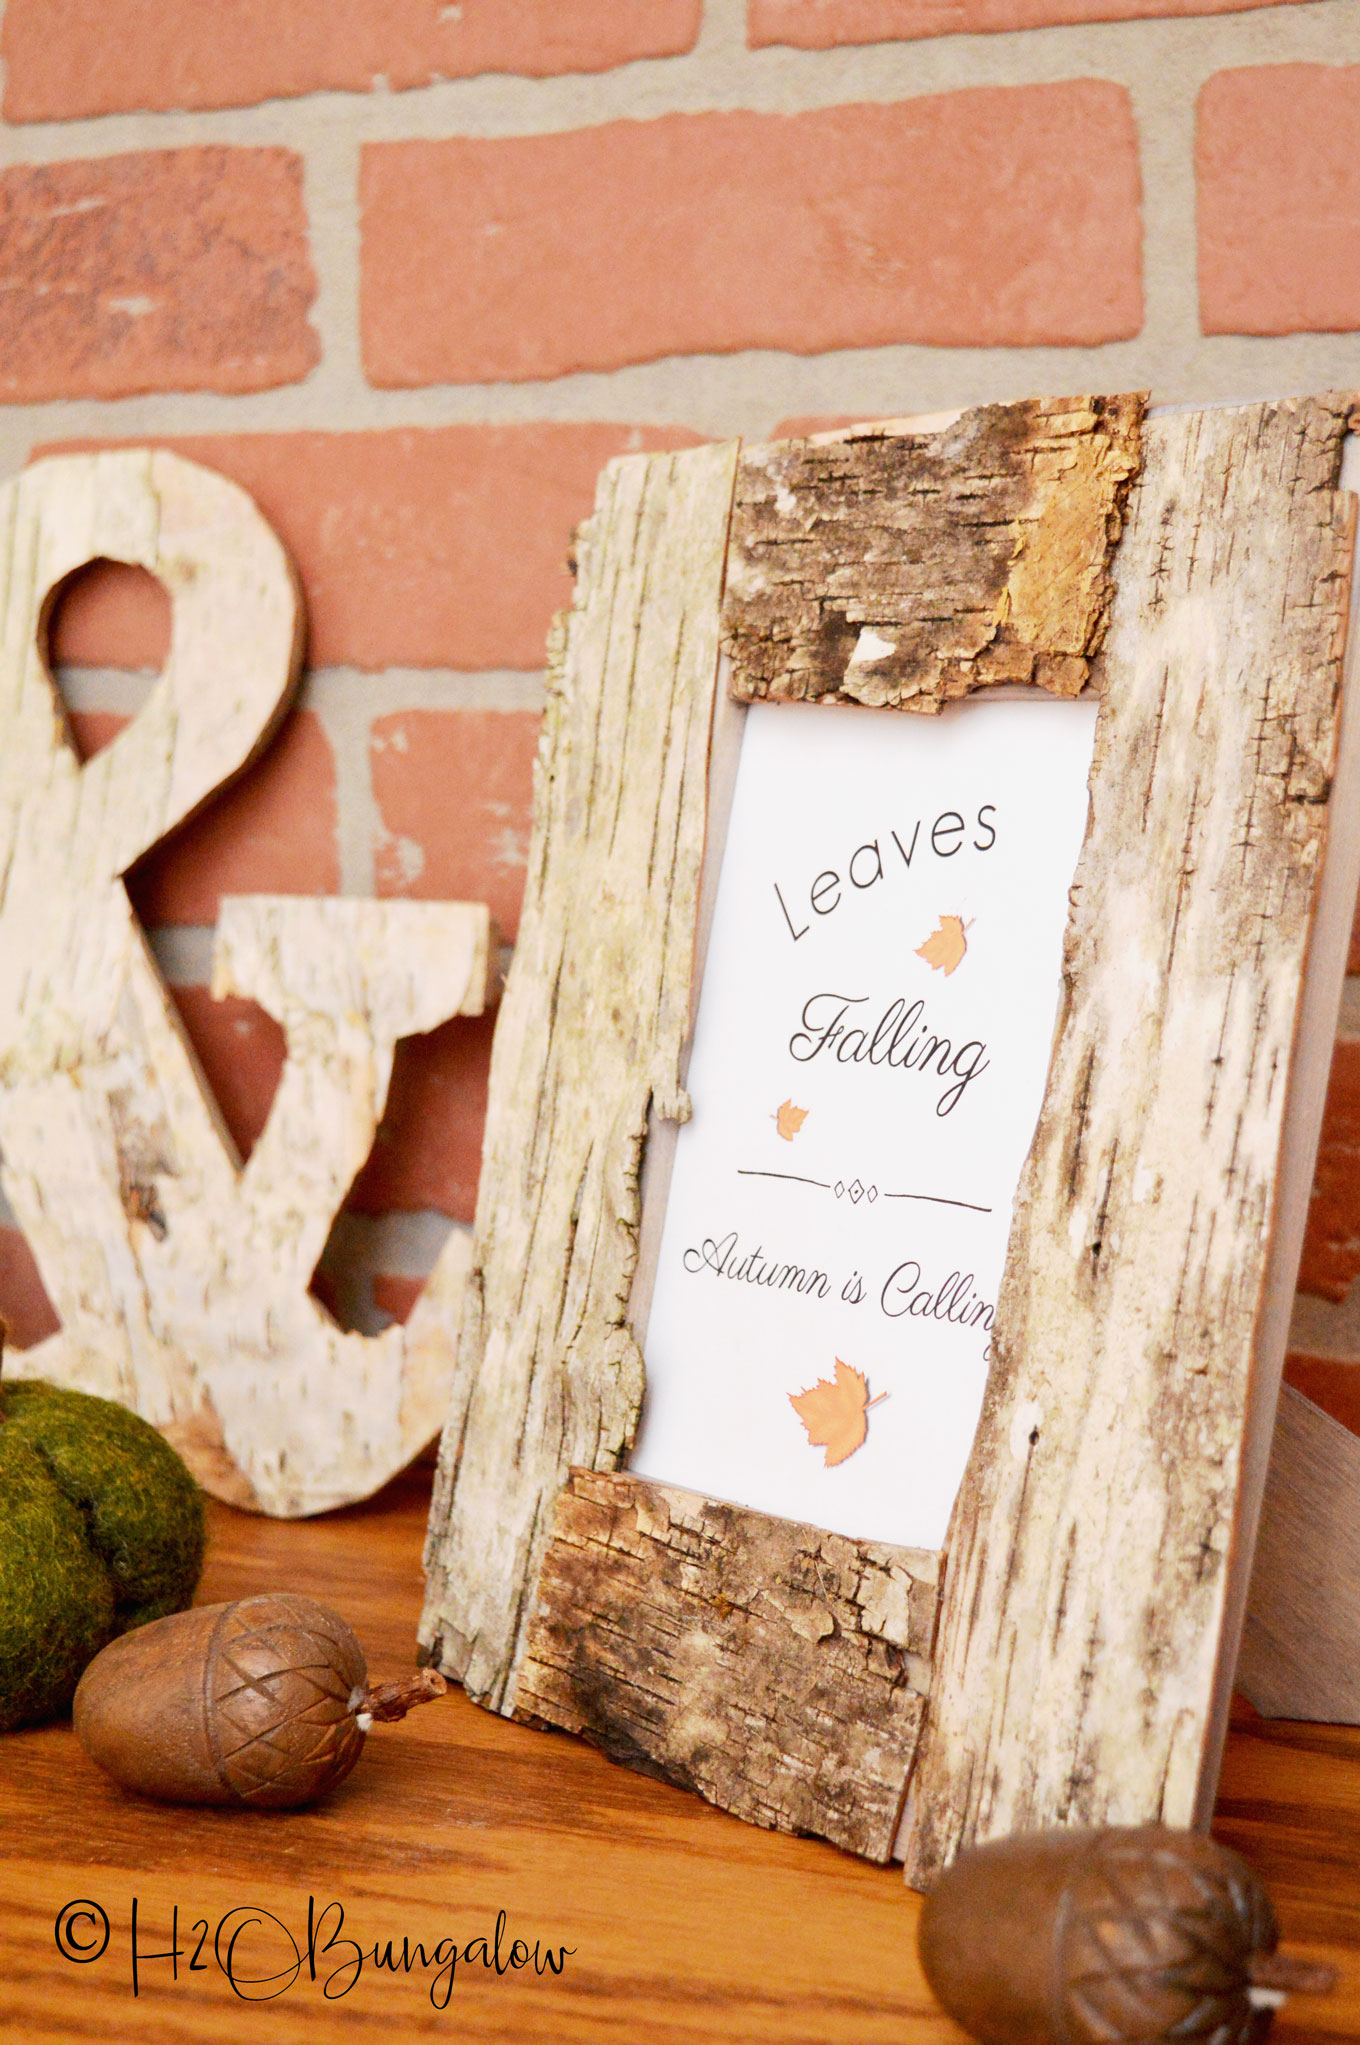 Birch bark frame and ampersand sitting on wood mantle with acorns